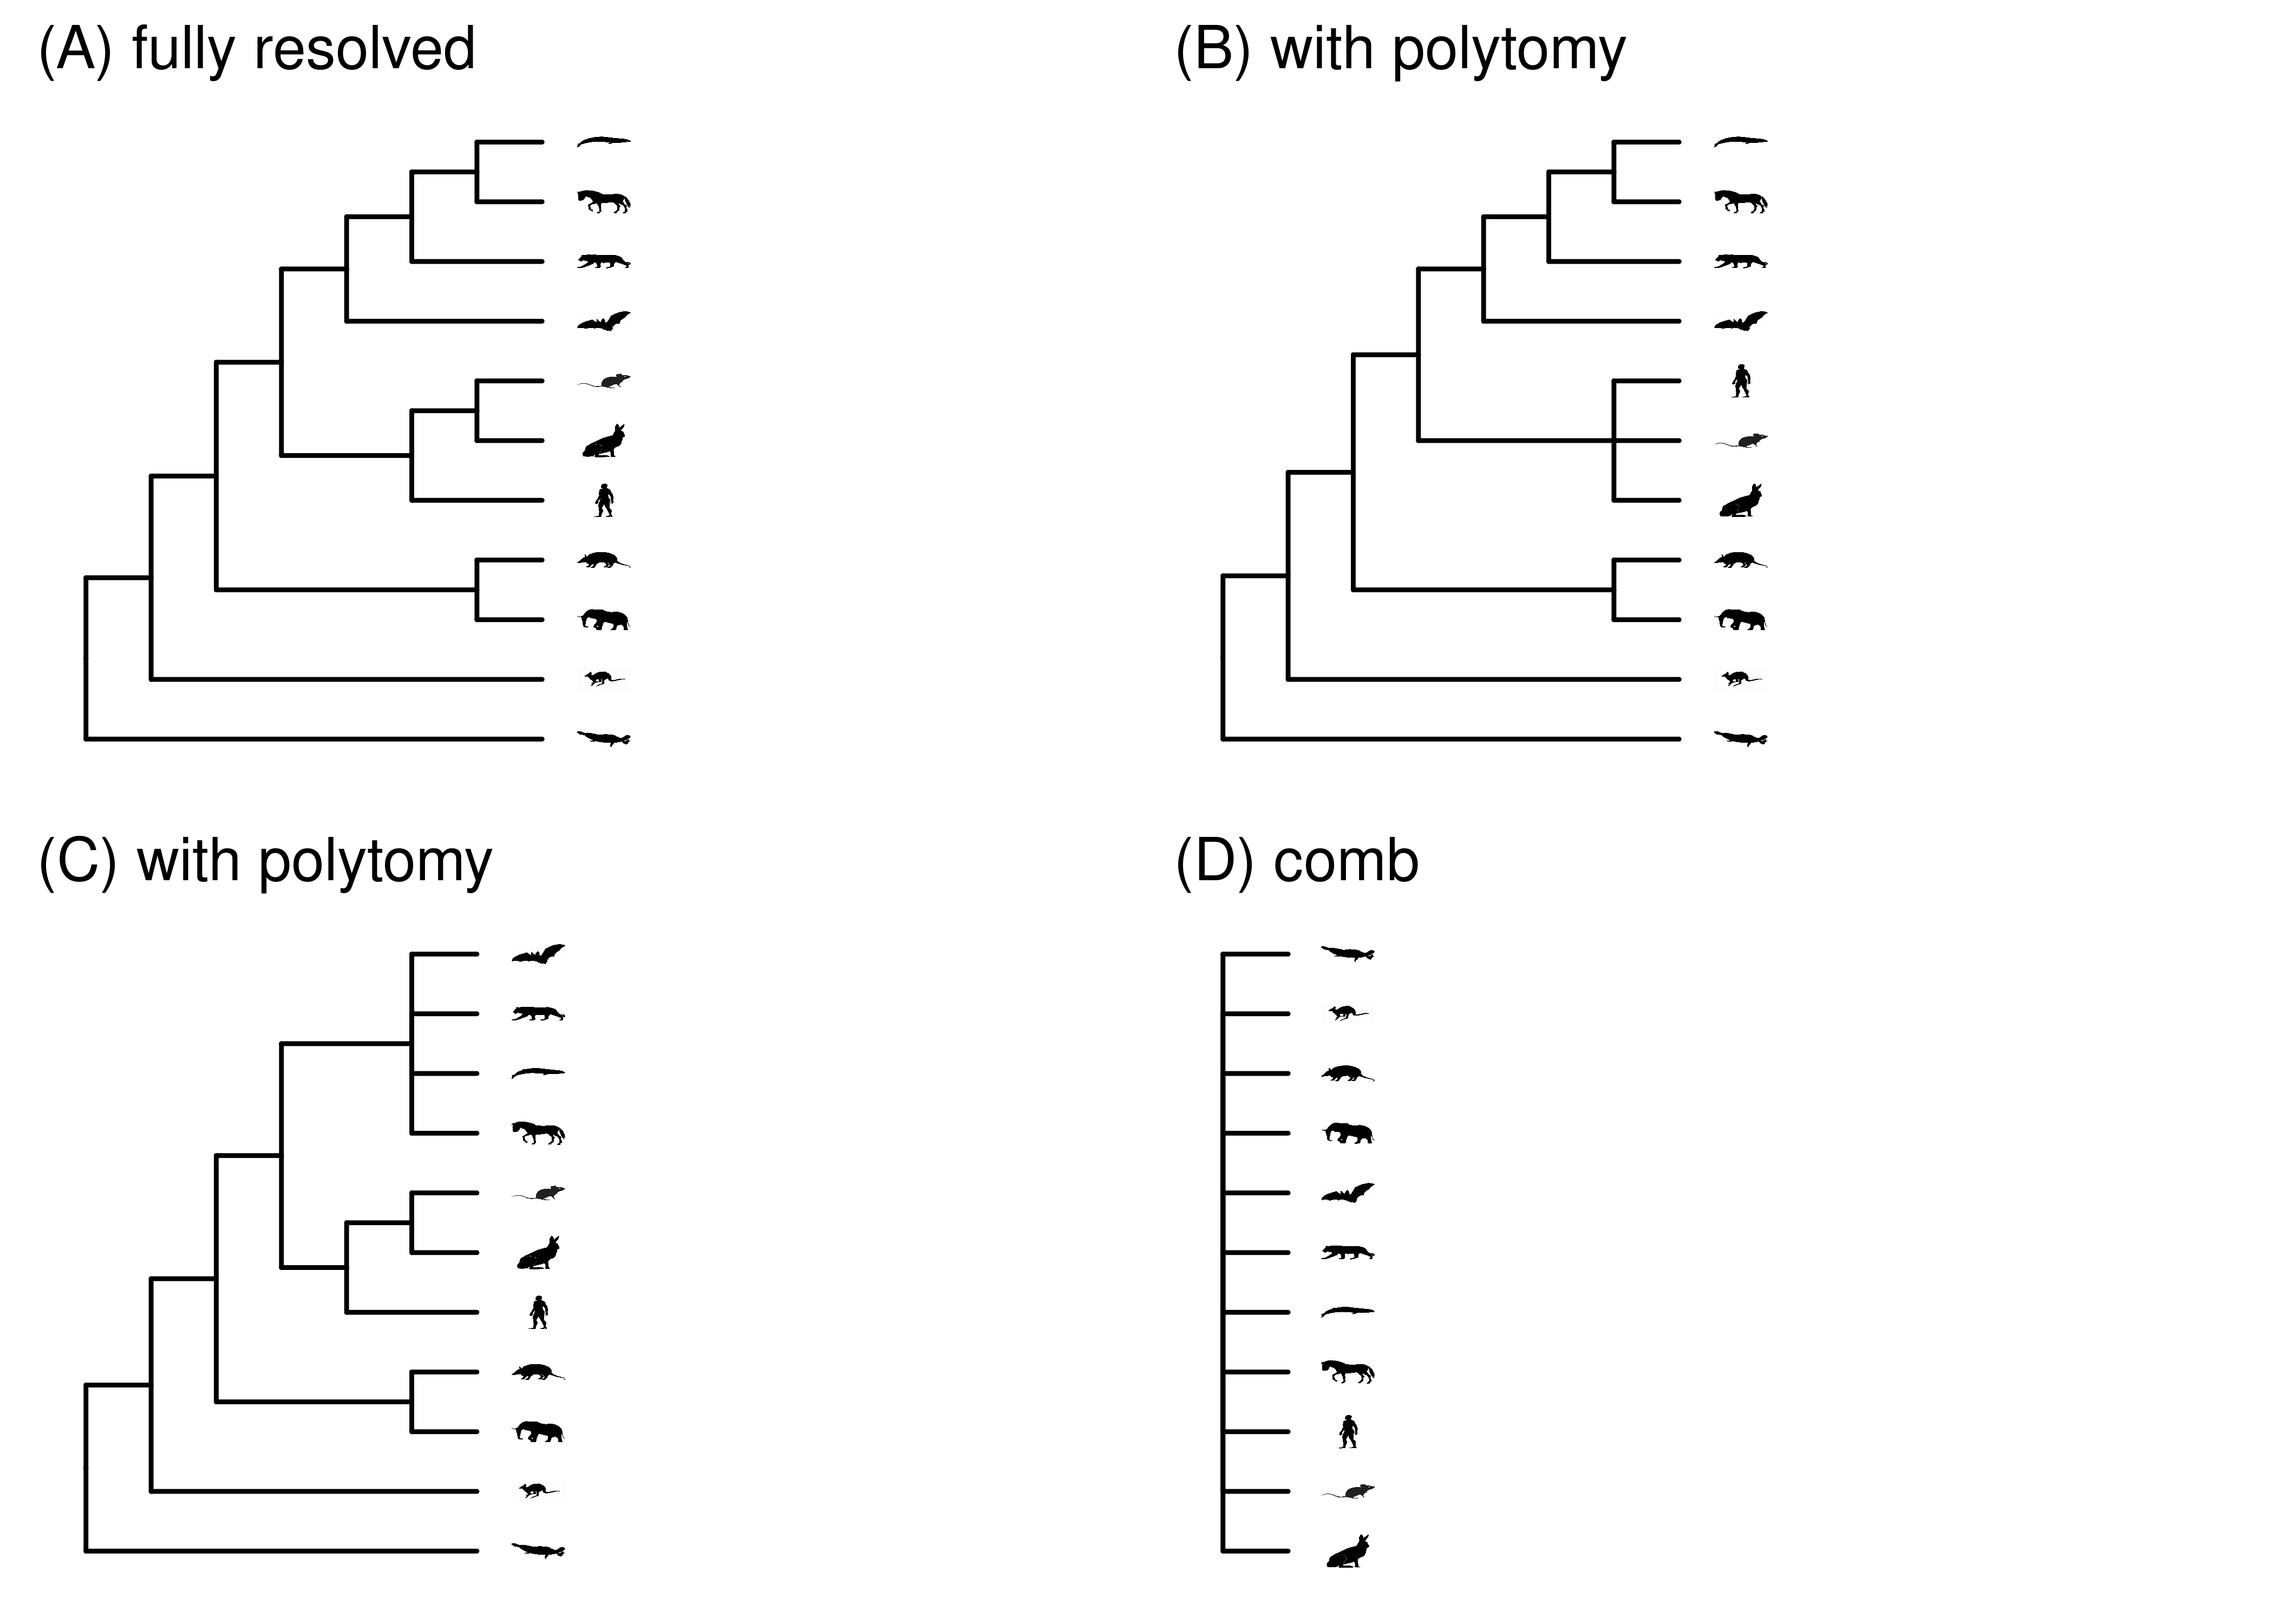 (A) The fully resolved mammal tree used in other figures. (B-C) Different polytomies created in this tree by collapsing some groups. (D) A fully unresolved comb tree.